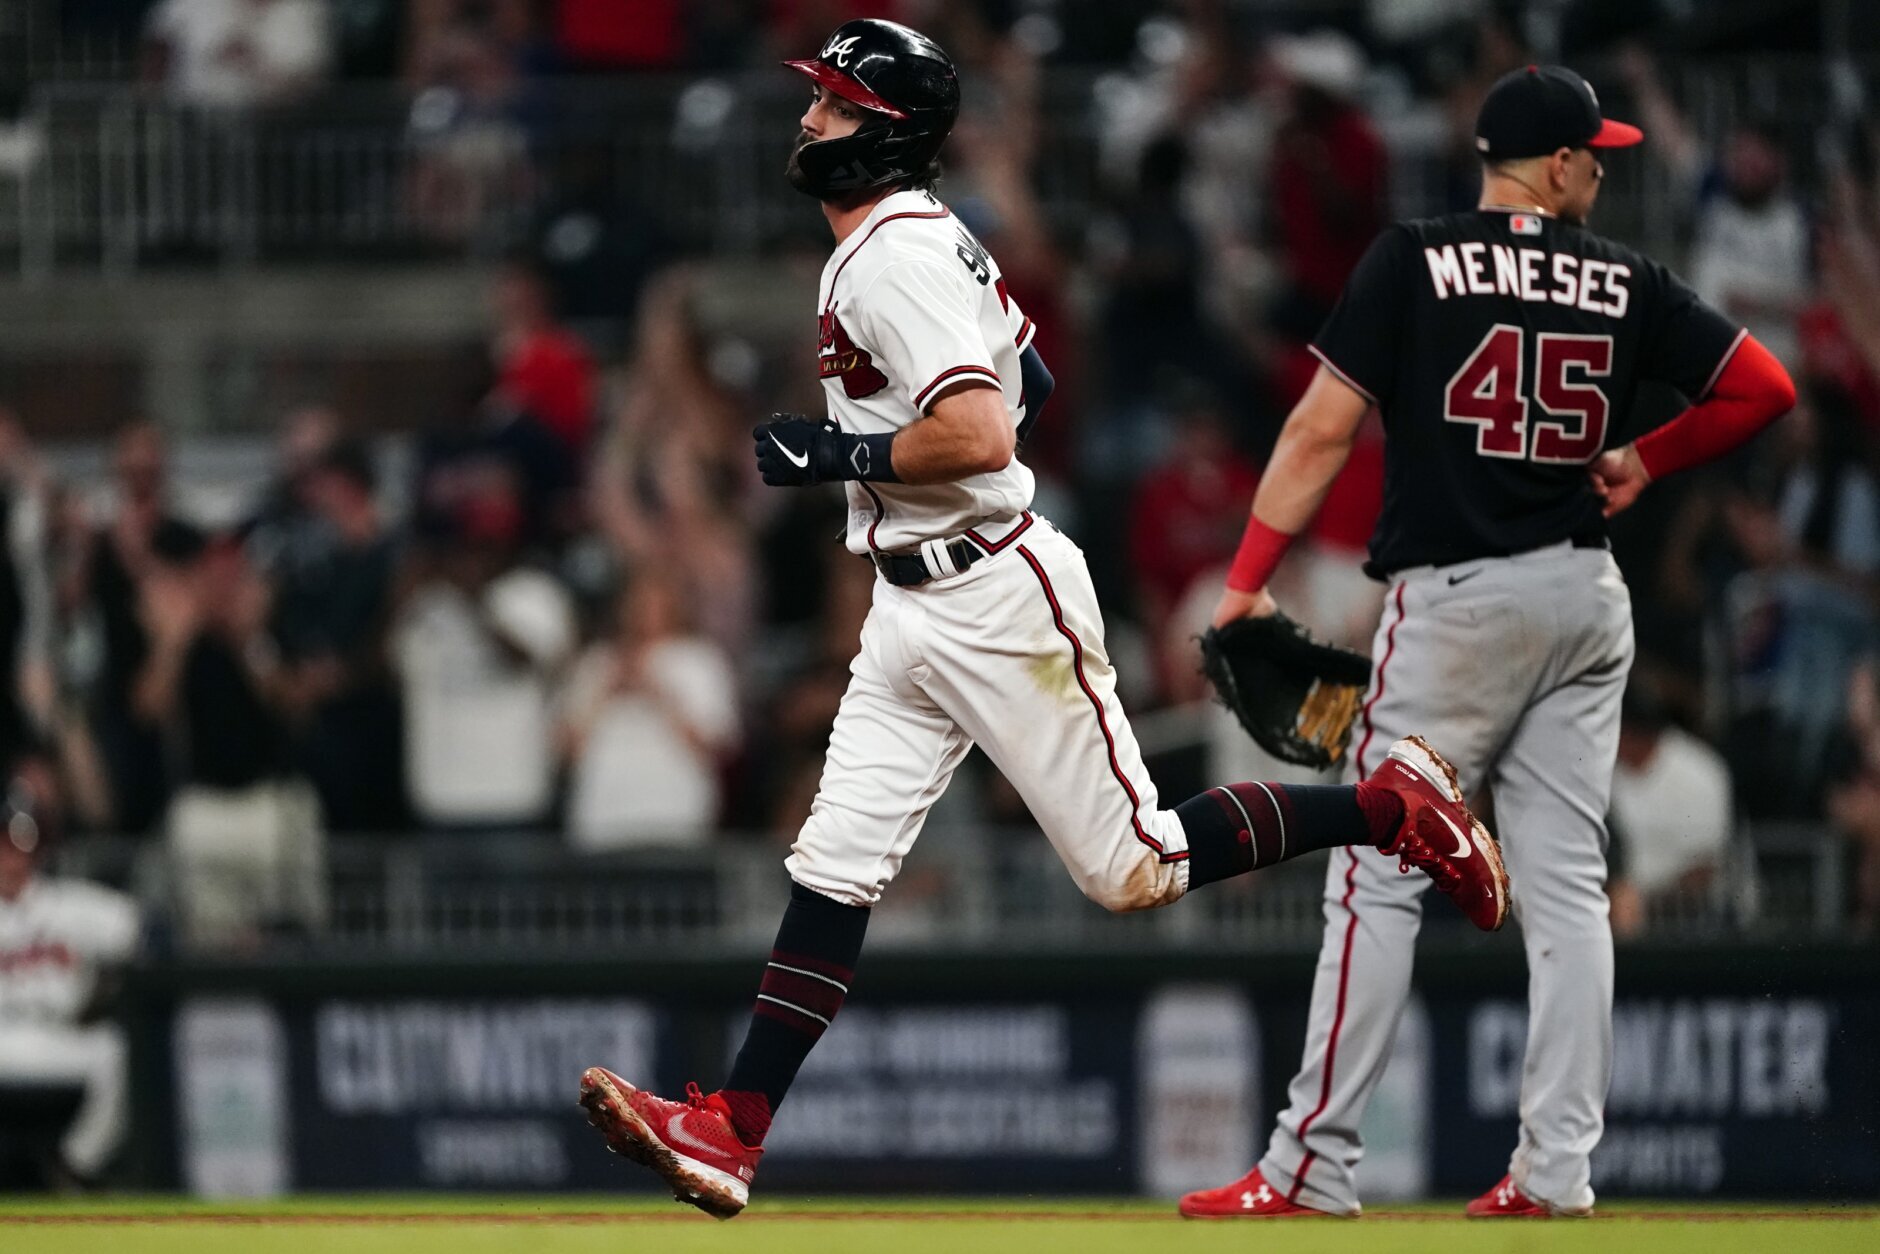 Swanson's walk-off homer gives Braves 7-6 win over Nationals